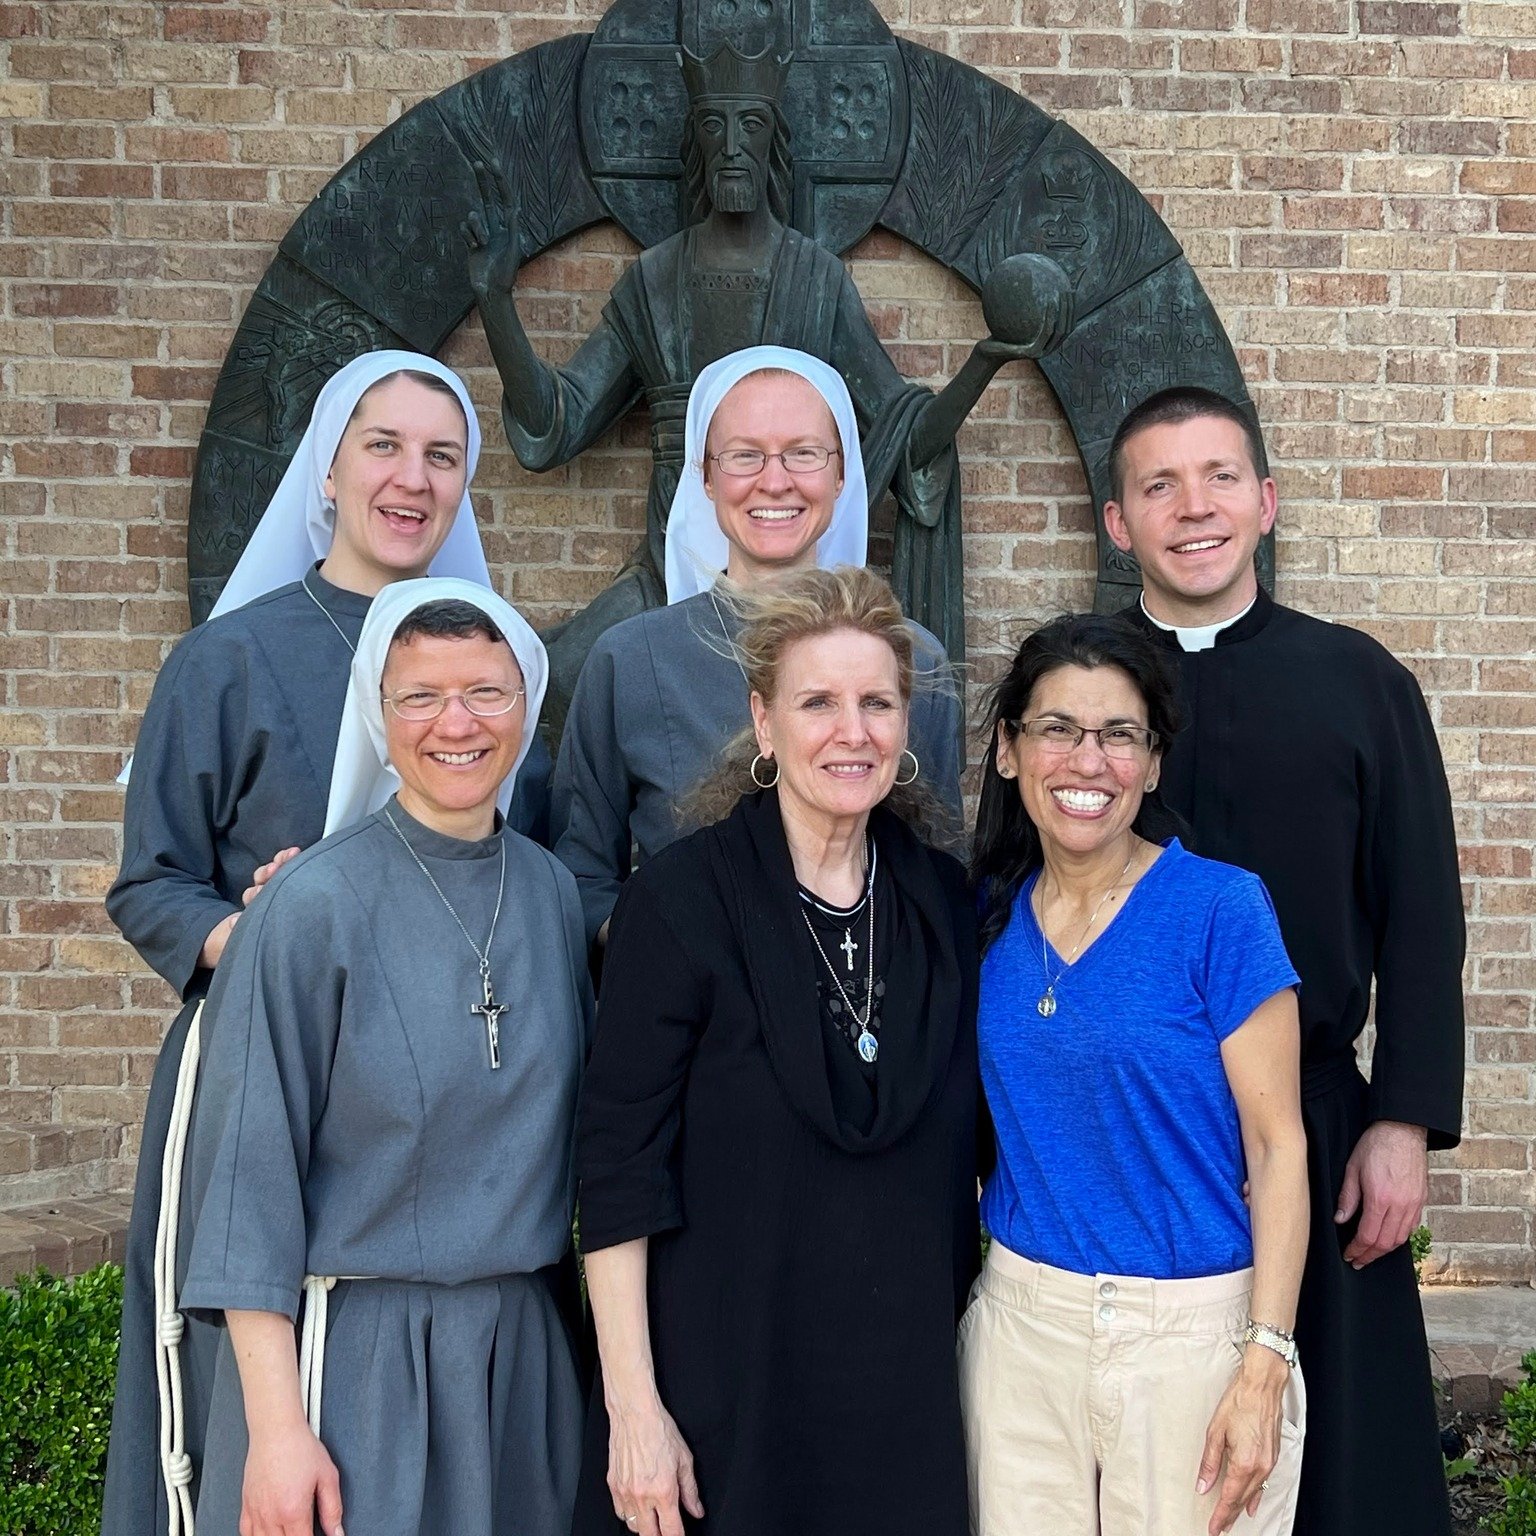 Fr. Paul Kostka helped lead Spiritual Exercises for the Diocese of San Angelo and visited with Carl and Amy Perez, great friends of the Servants! Thank you Amy for inviting Fr. Paul to help direct and lead souls closer to Jesus!